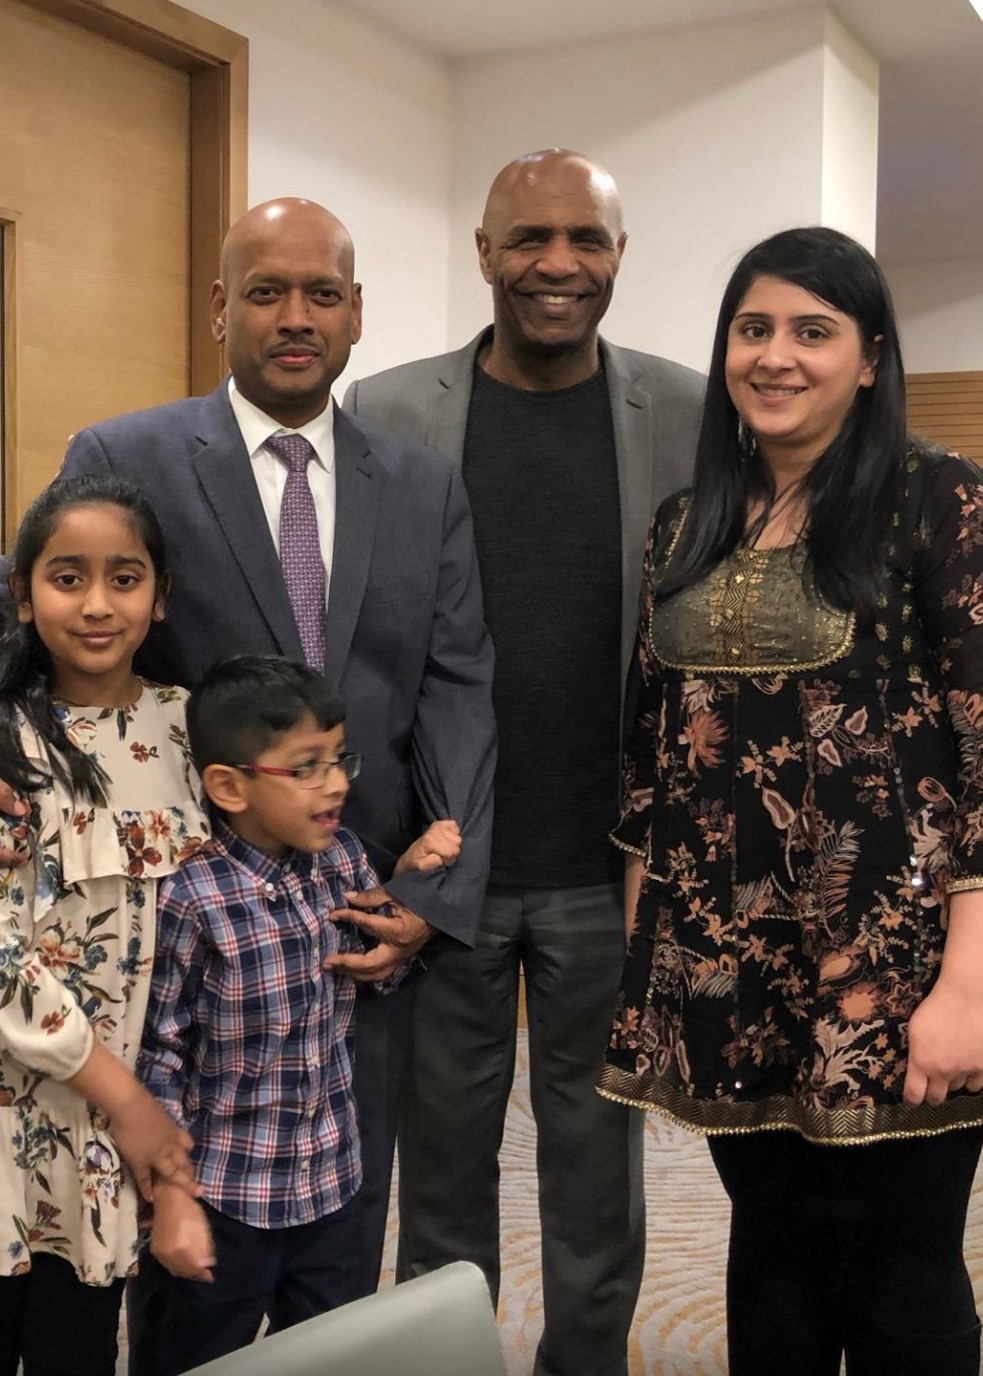 Kanageraj family and Luther Blissett